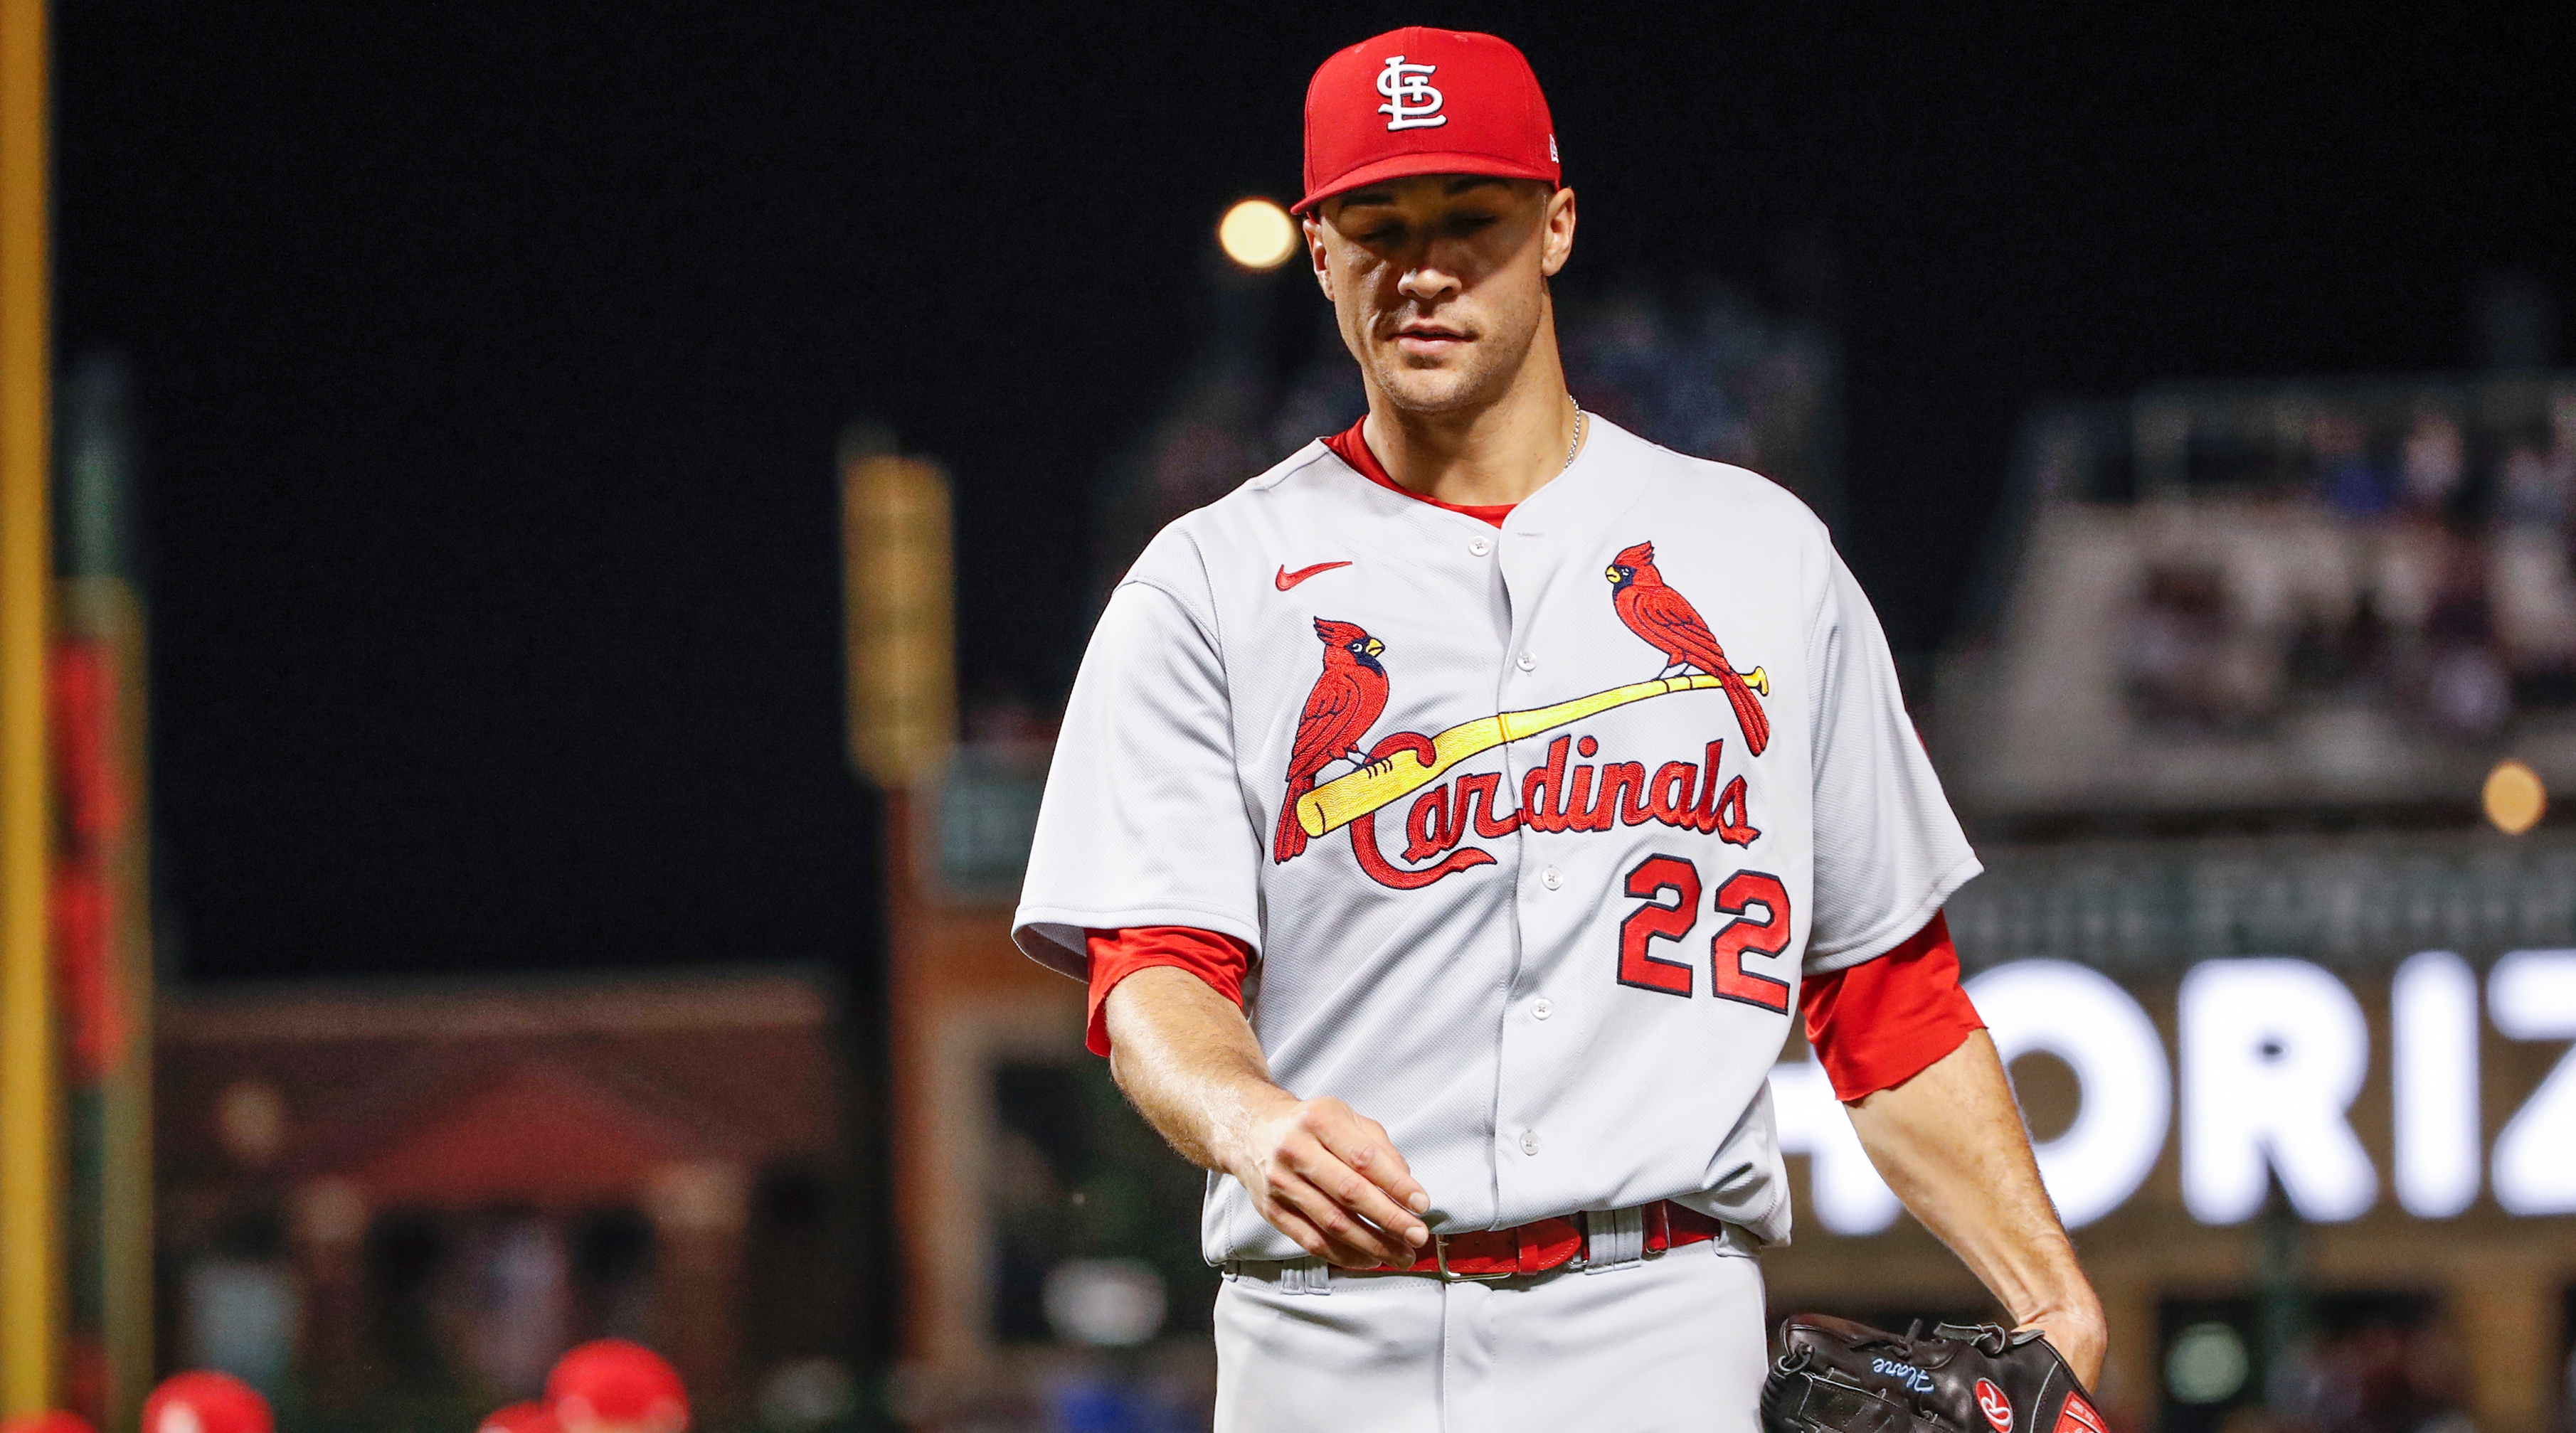 Cardinals announce their first Pride Night, set for August